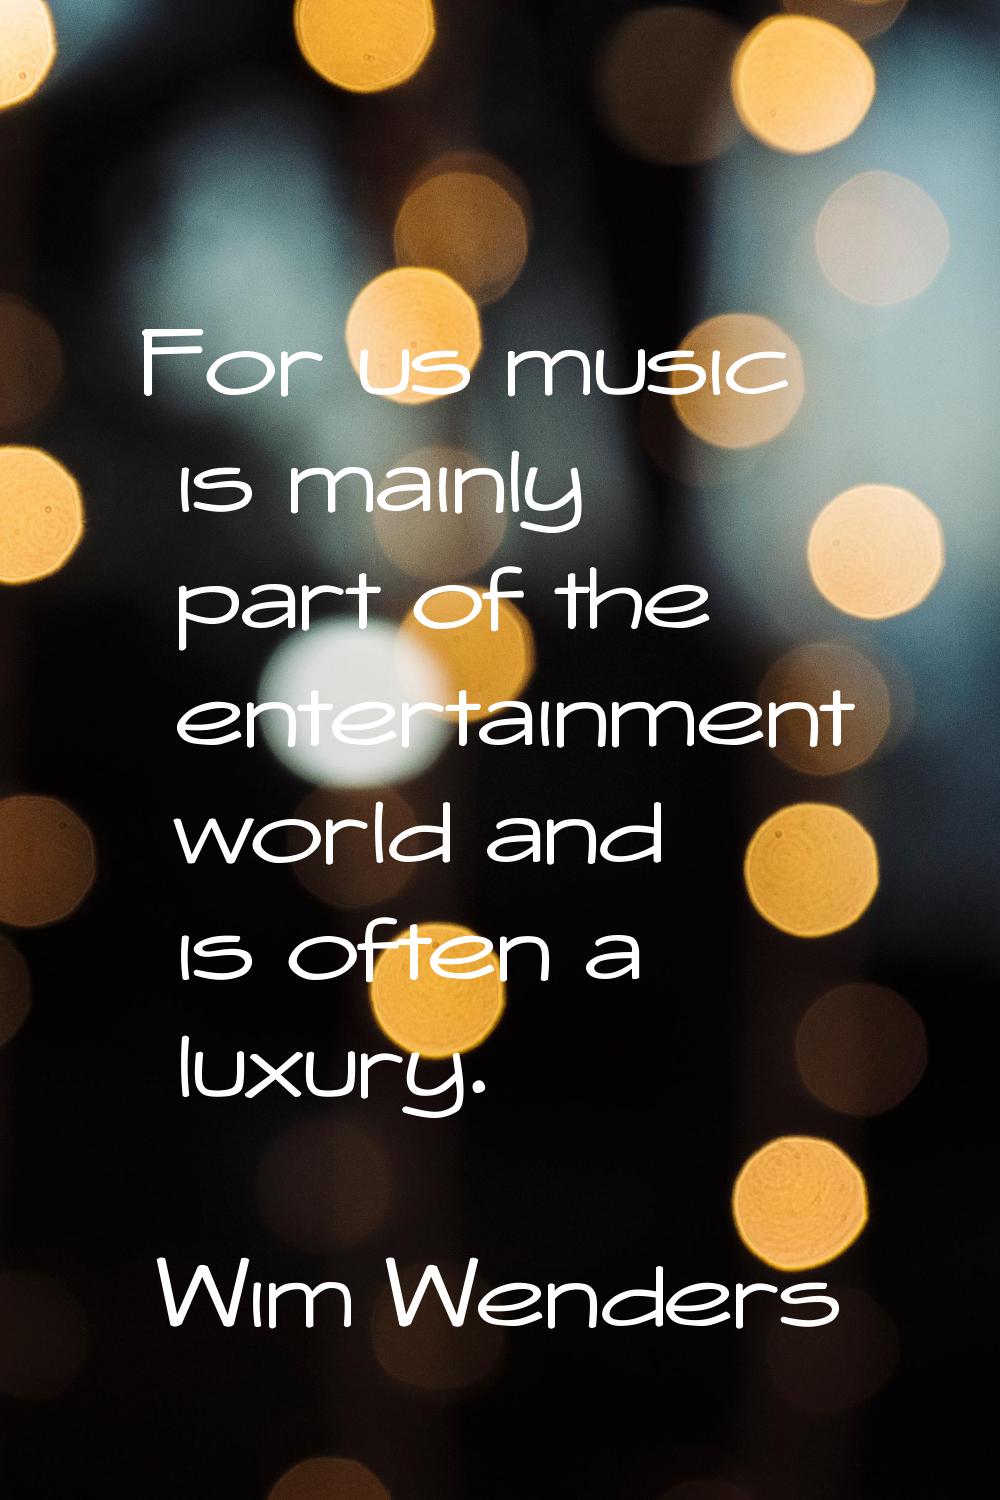 For us music is mainly part of the entertainment world and is often a luxury.